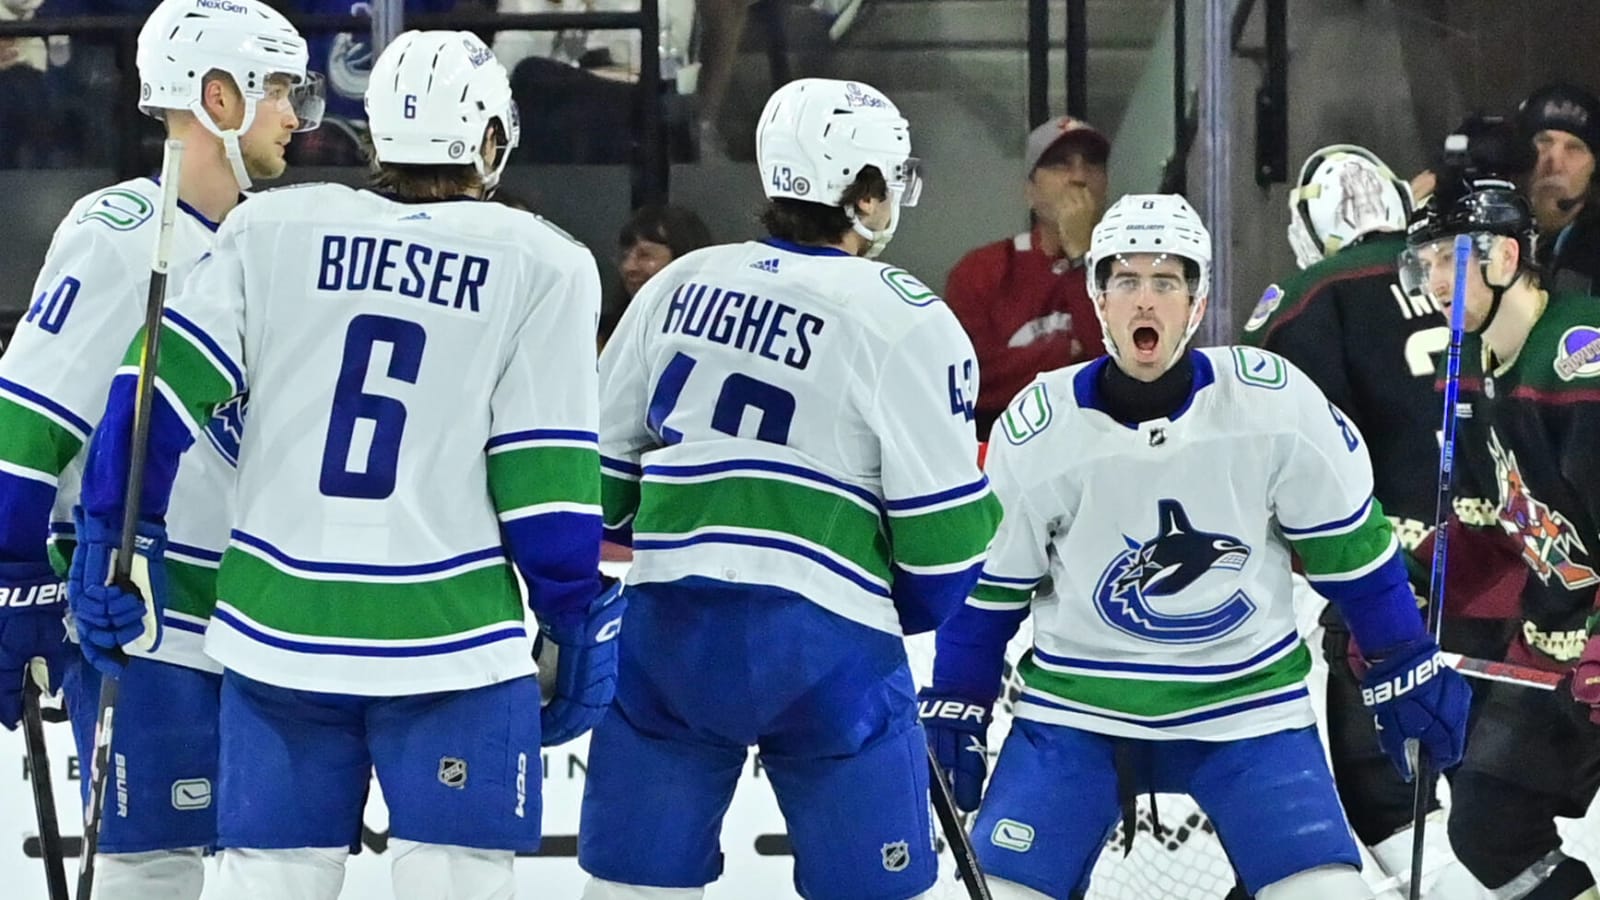  Quinn Hughes getting hot at the right time as Vancouver Canucks beat Coyotes 2-1